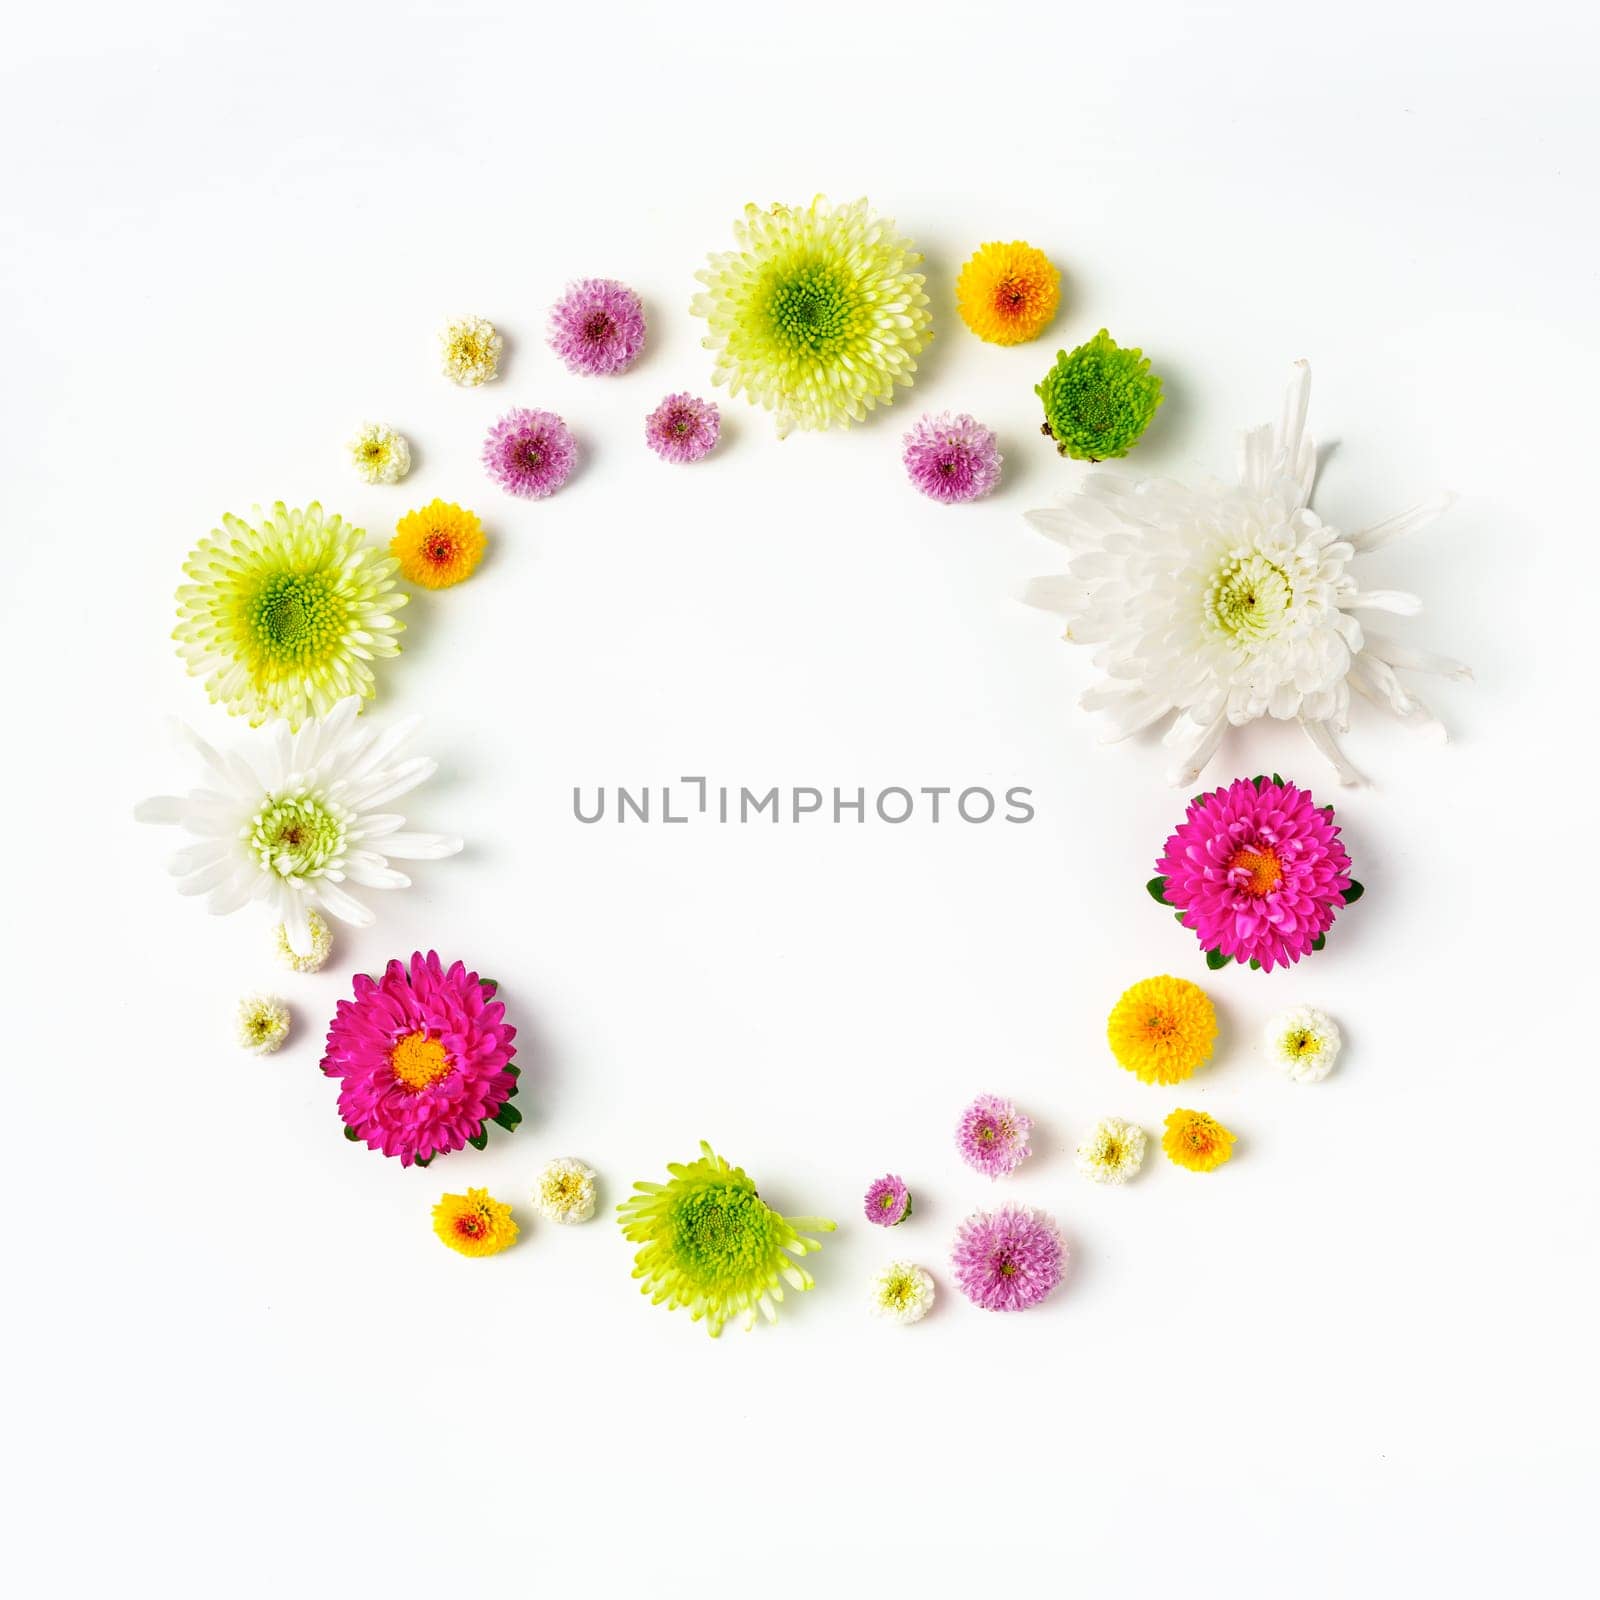 Small spring flowers arranged on white background copy space